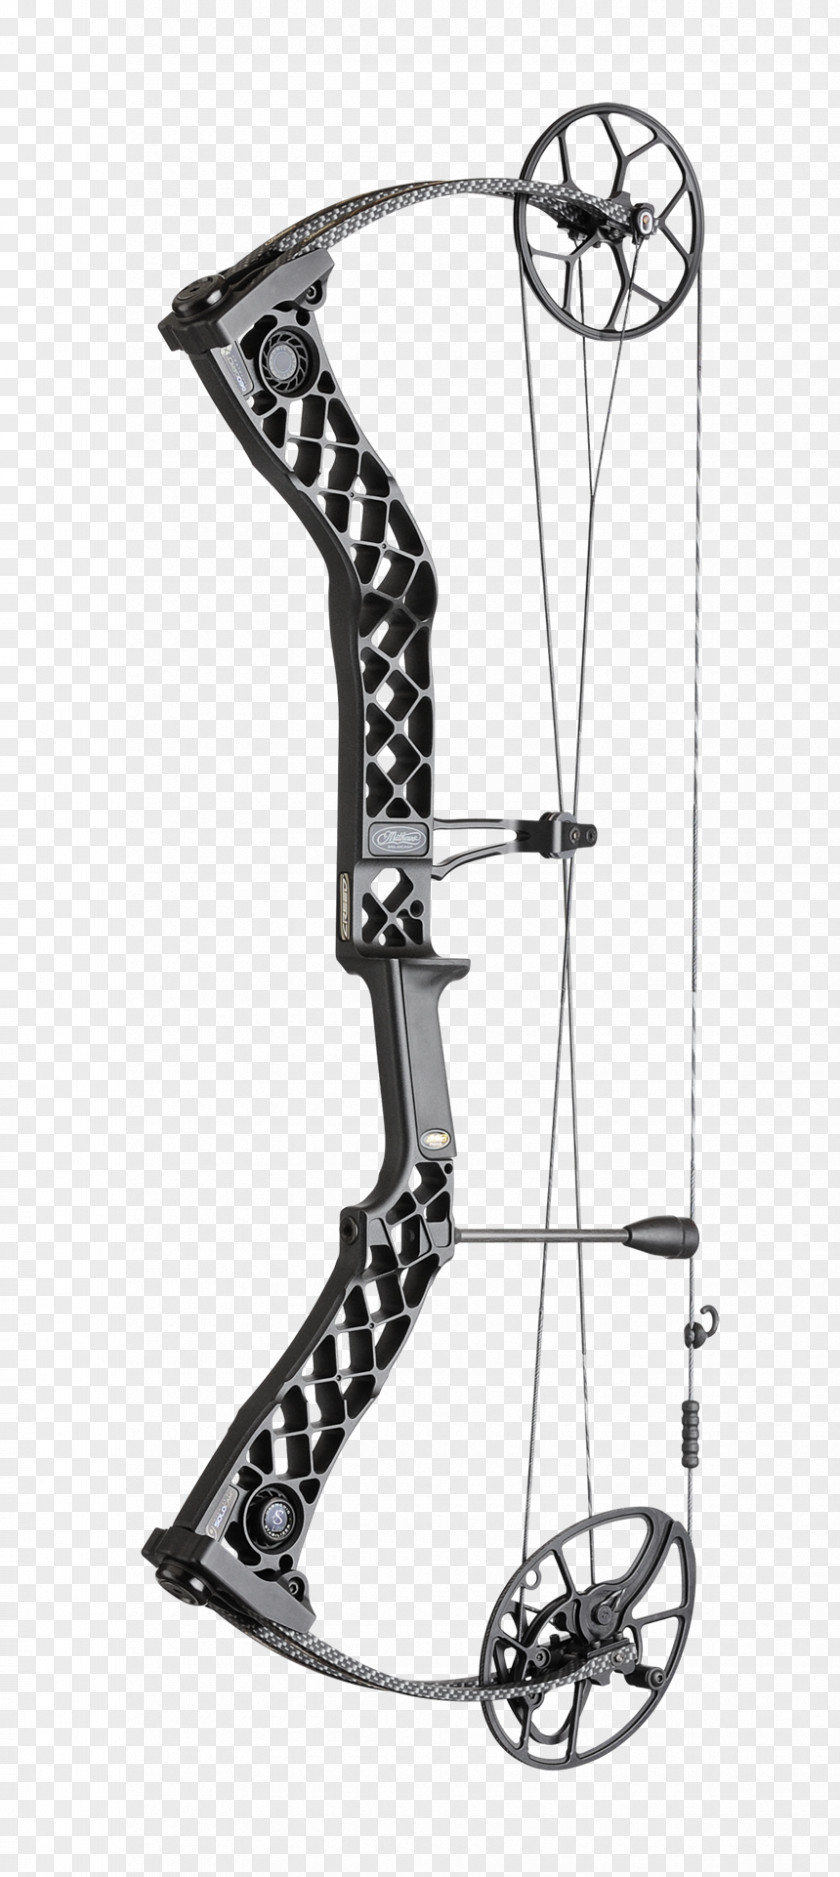 Arrow Archery Bow And Compound Bows Bowhunting PNG